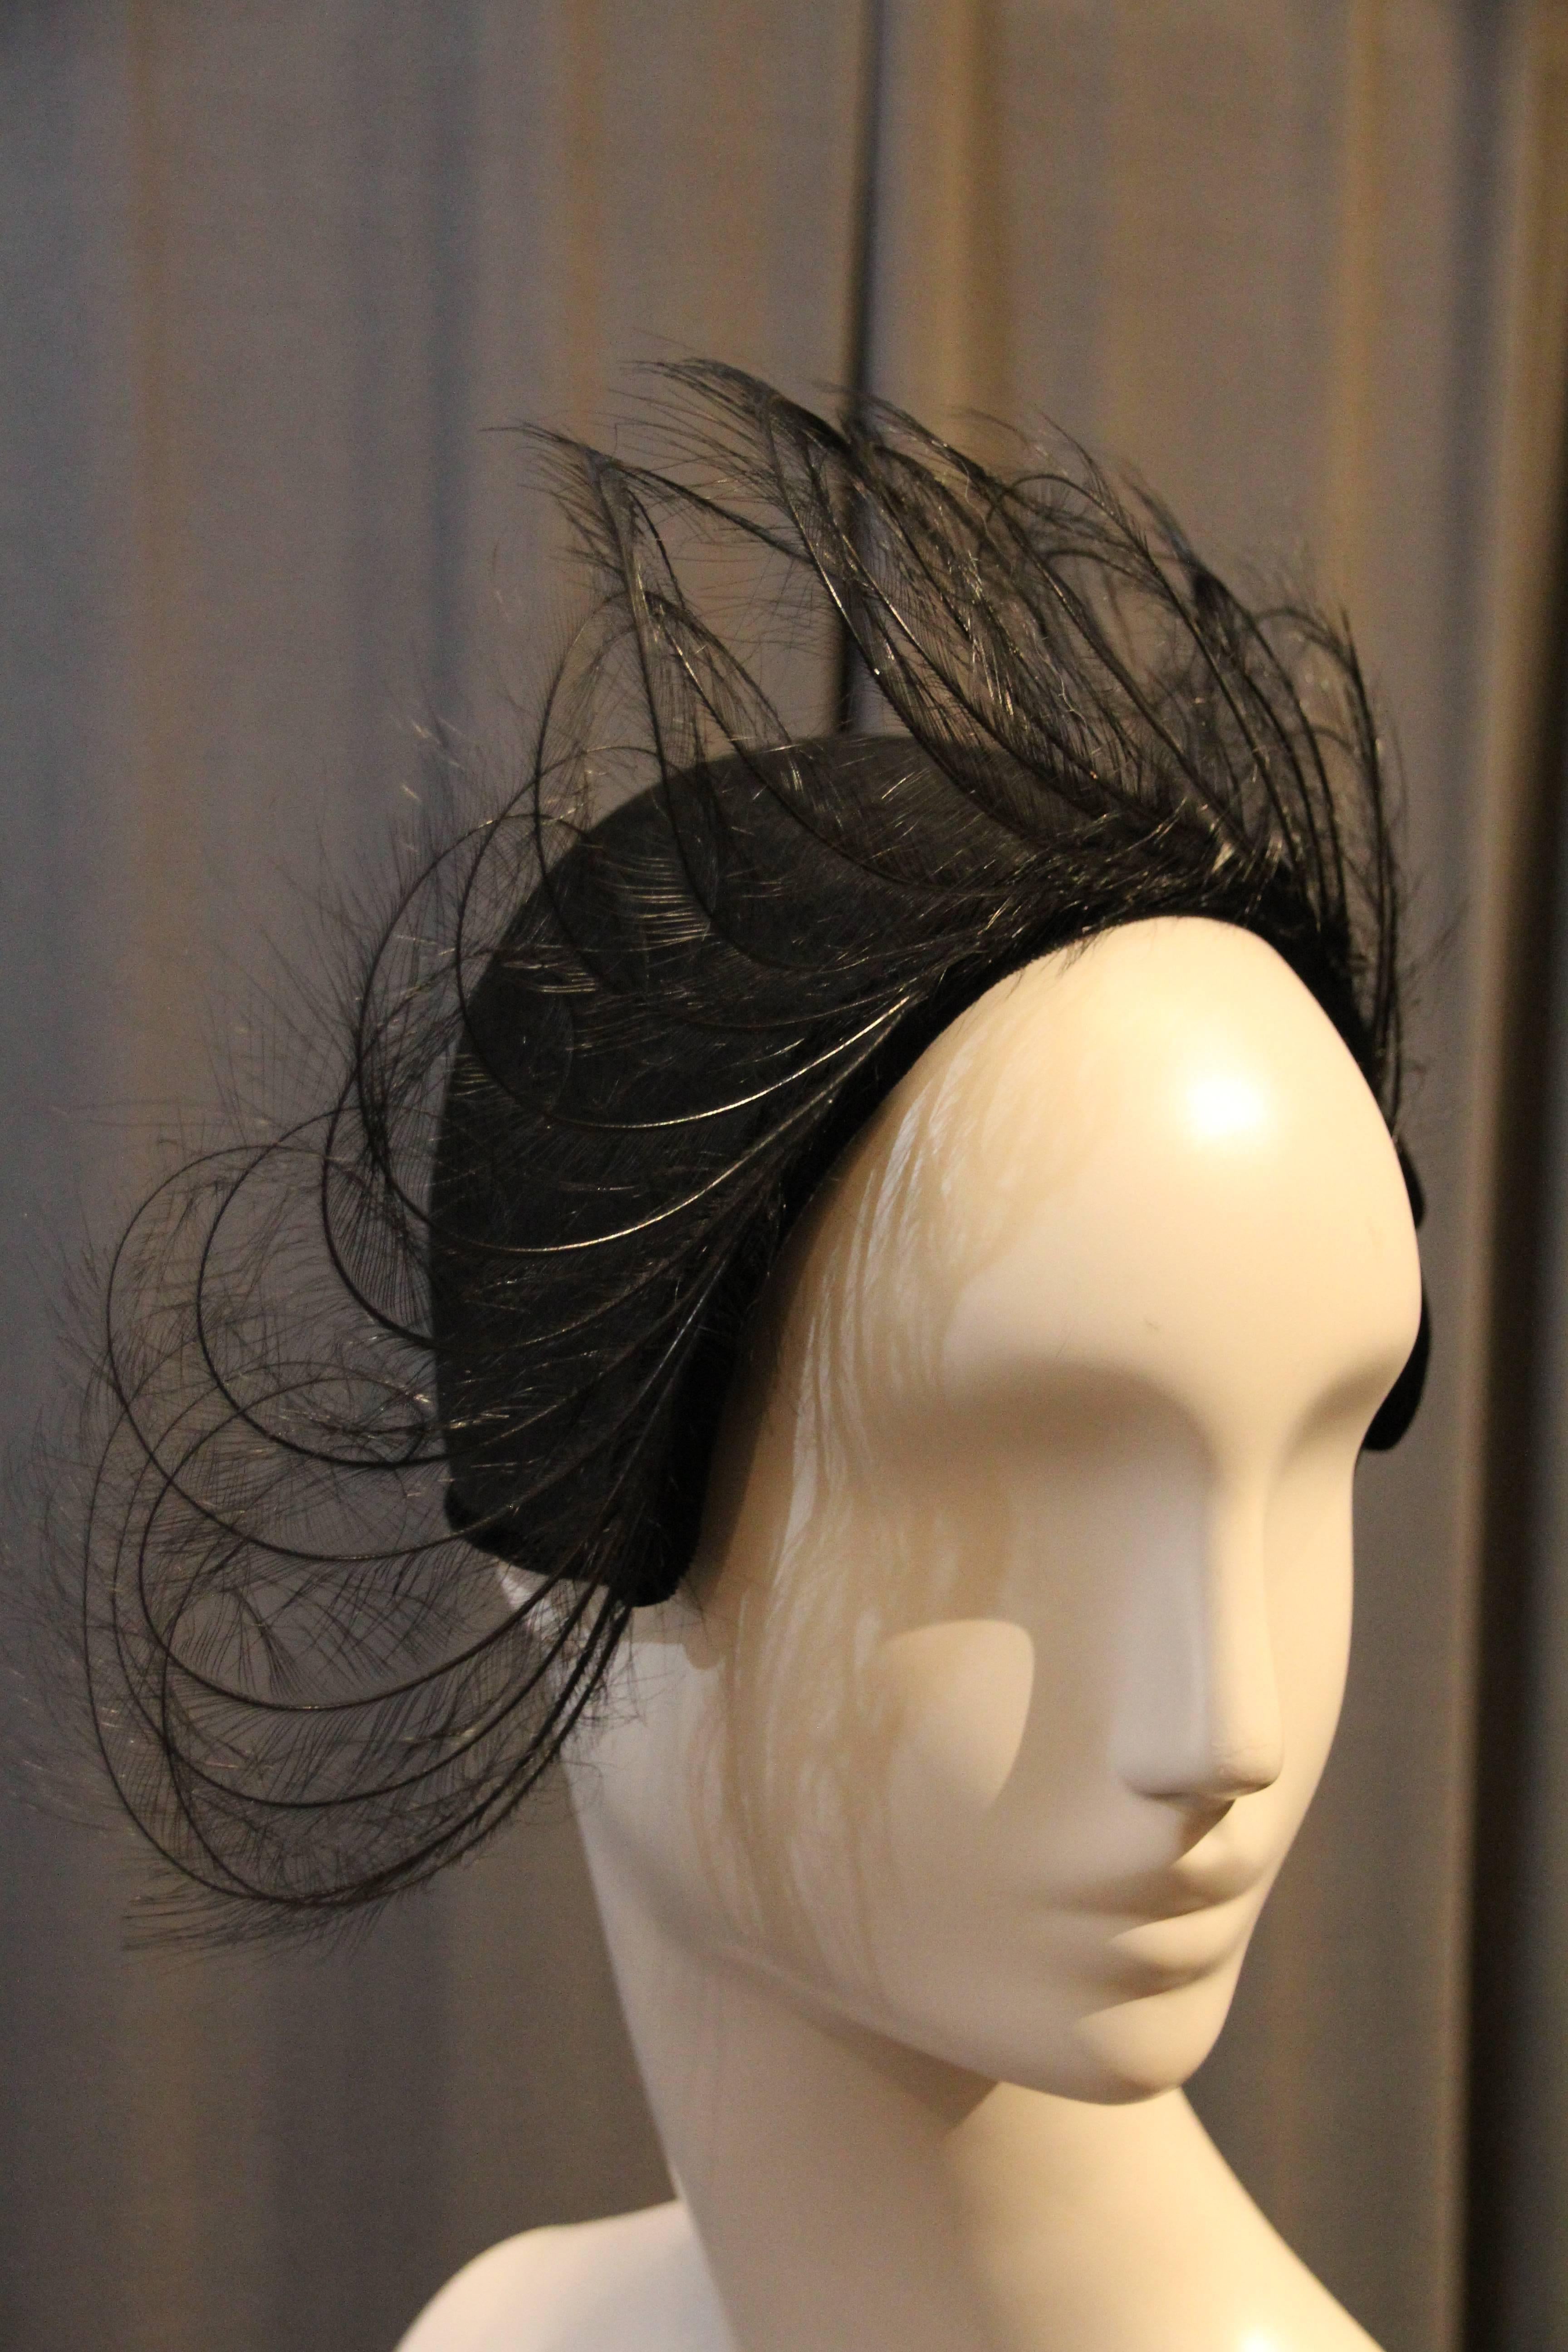 An incredible 1950s Elsa Schiaparelli cashmere felt cloche or skull cap style hat: A sophisticated, face-framing style with felt bow at left side and a stunning fan of curled egret feathers. 1920s-inspired. 